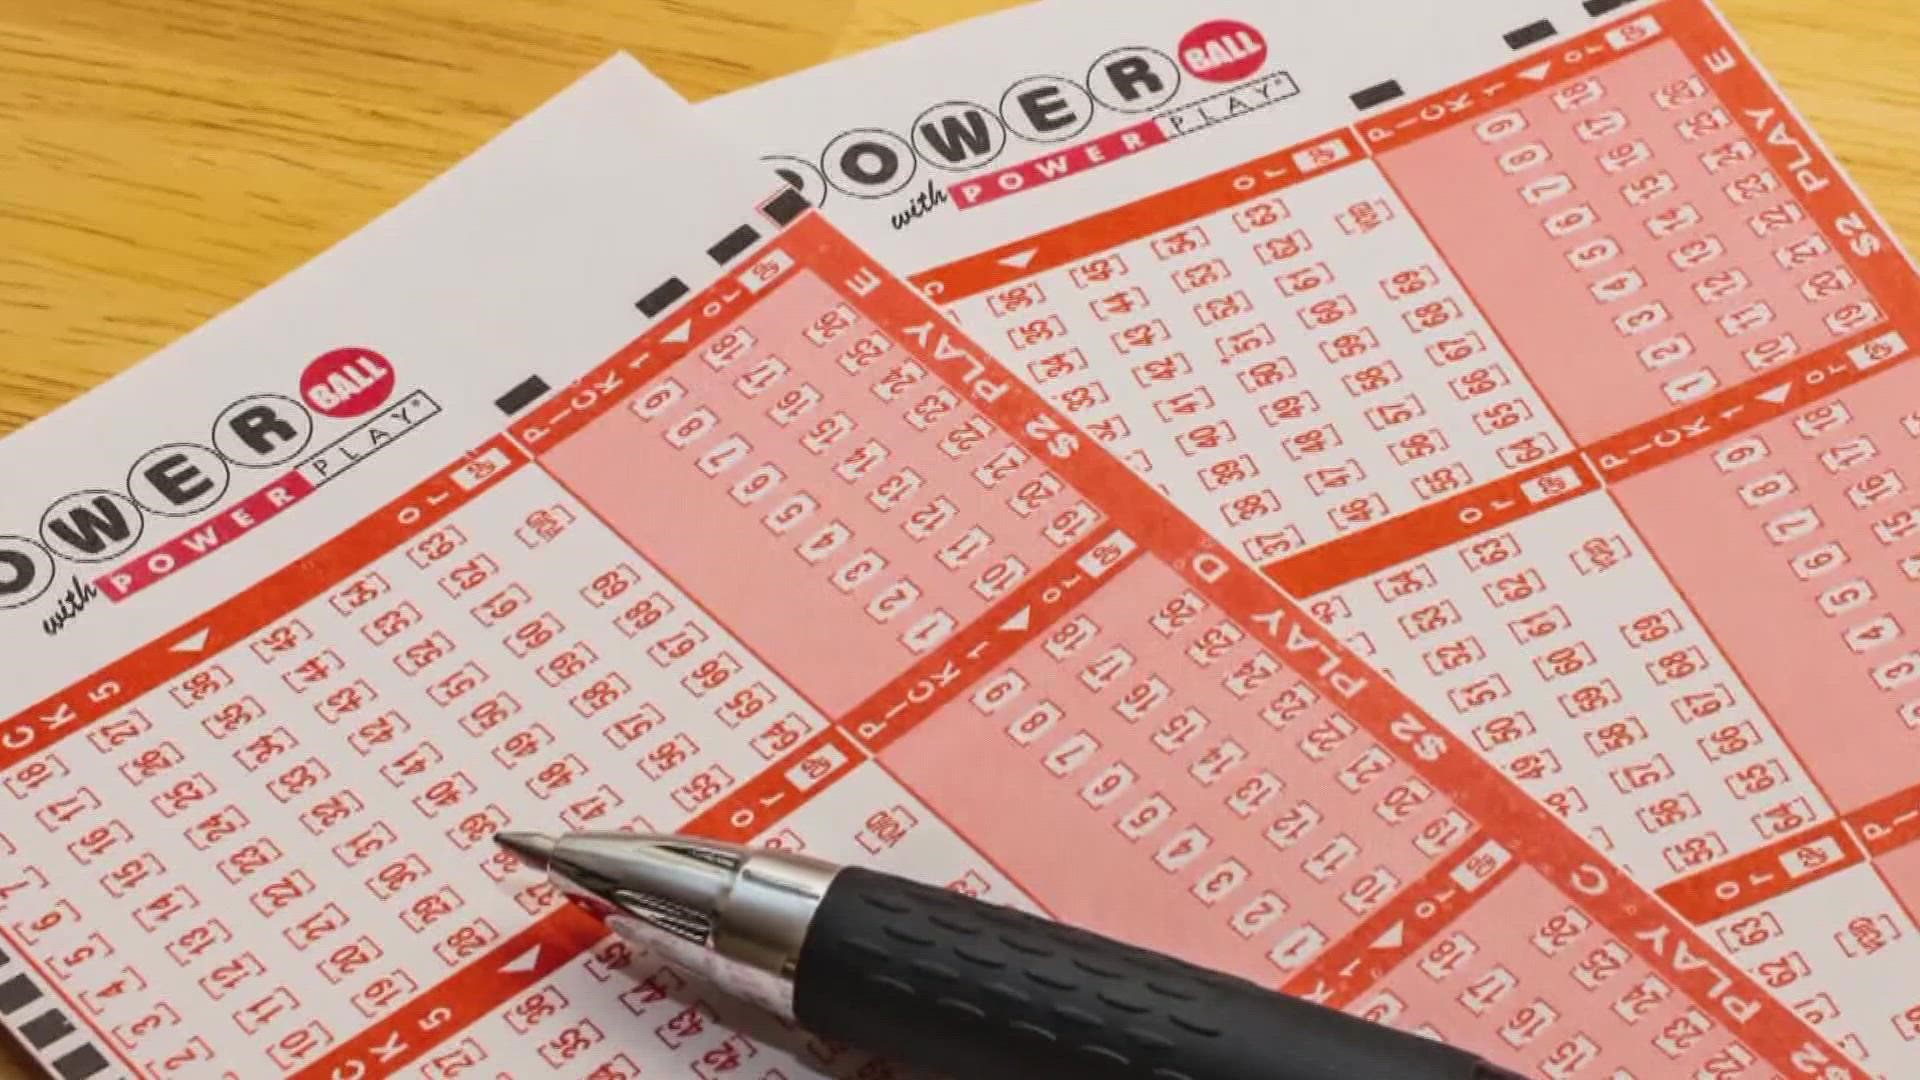 The lucky person matched al five white ball numbers on last week's Powerball drawing.